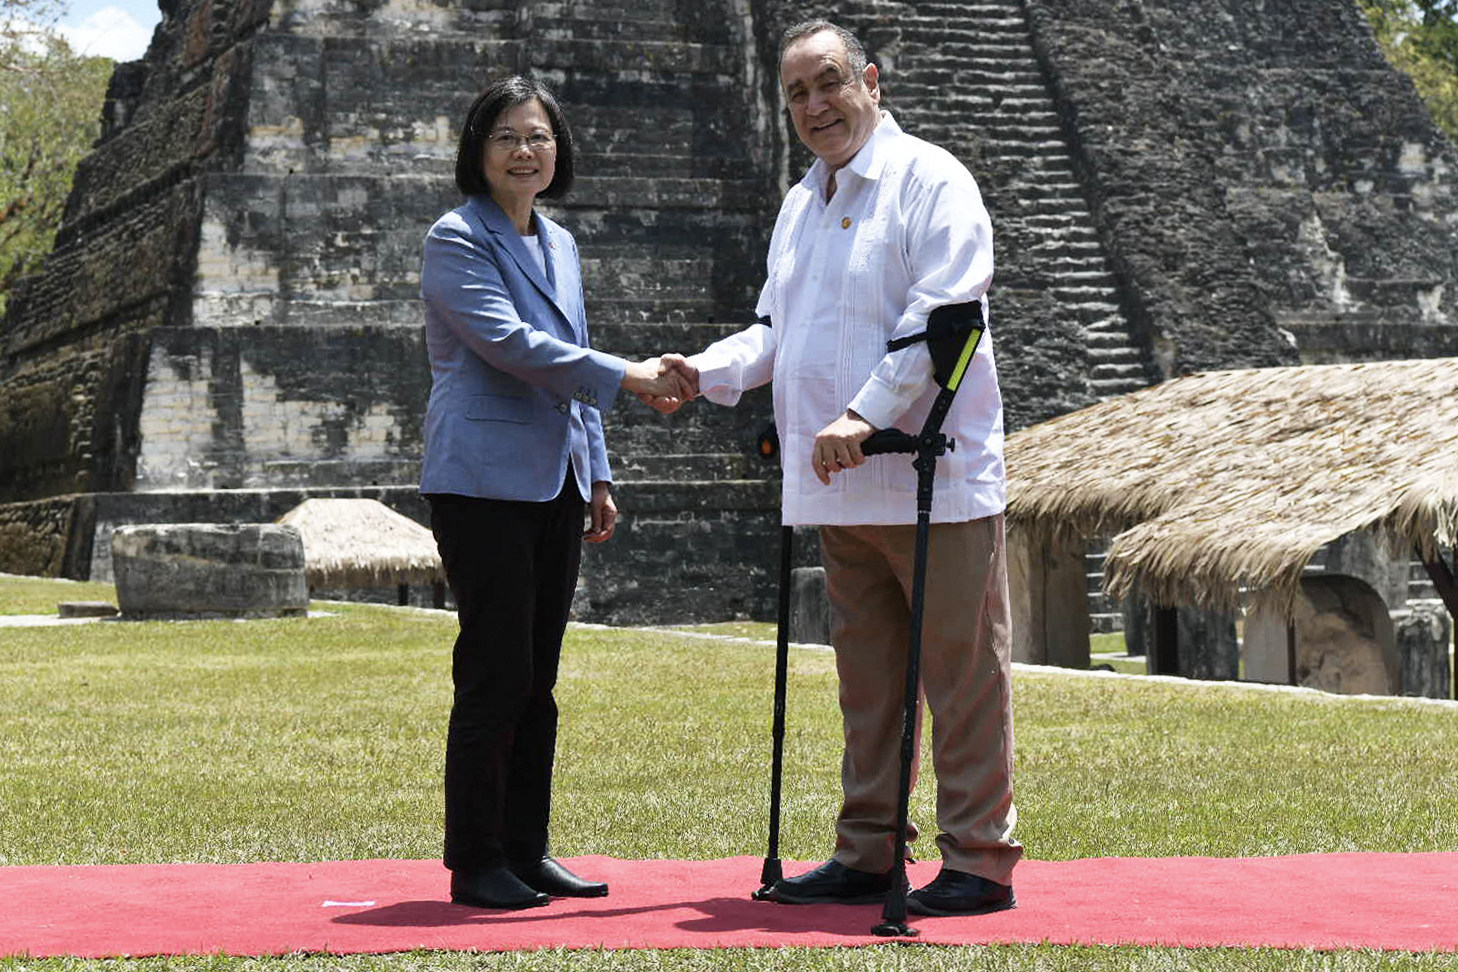 In April last year, Taiwan’s President Tsai Ing-wen, left, and Guatemala’s President Alejandro Giammattei met at the Tikal archaeological site in Peten, Guatemala. Photo: AFP